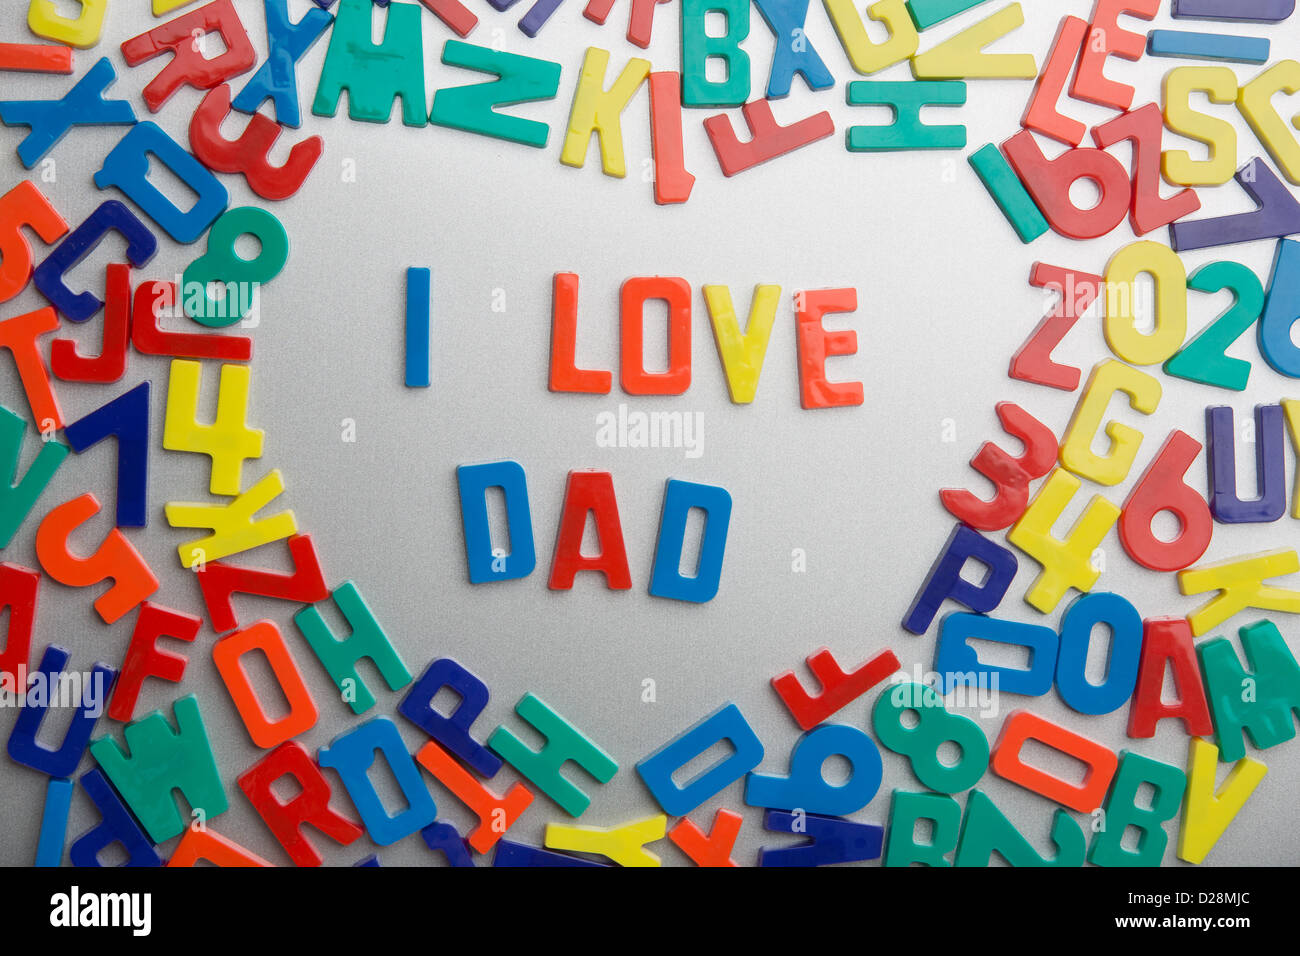 'I Love Dad' - Refrigerator magnets spell a message out of a jumble of letters Stock Photo